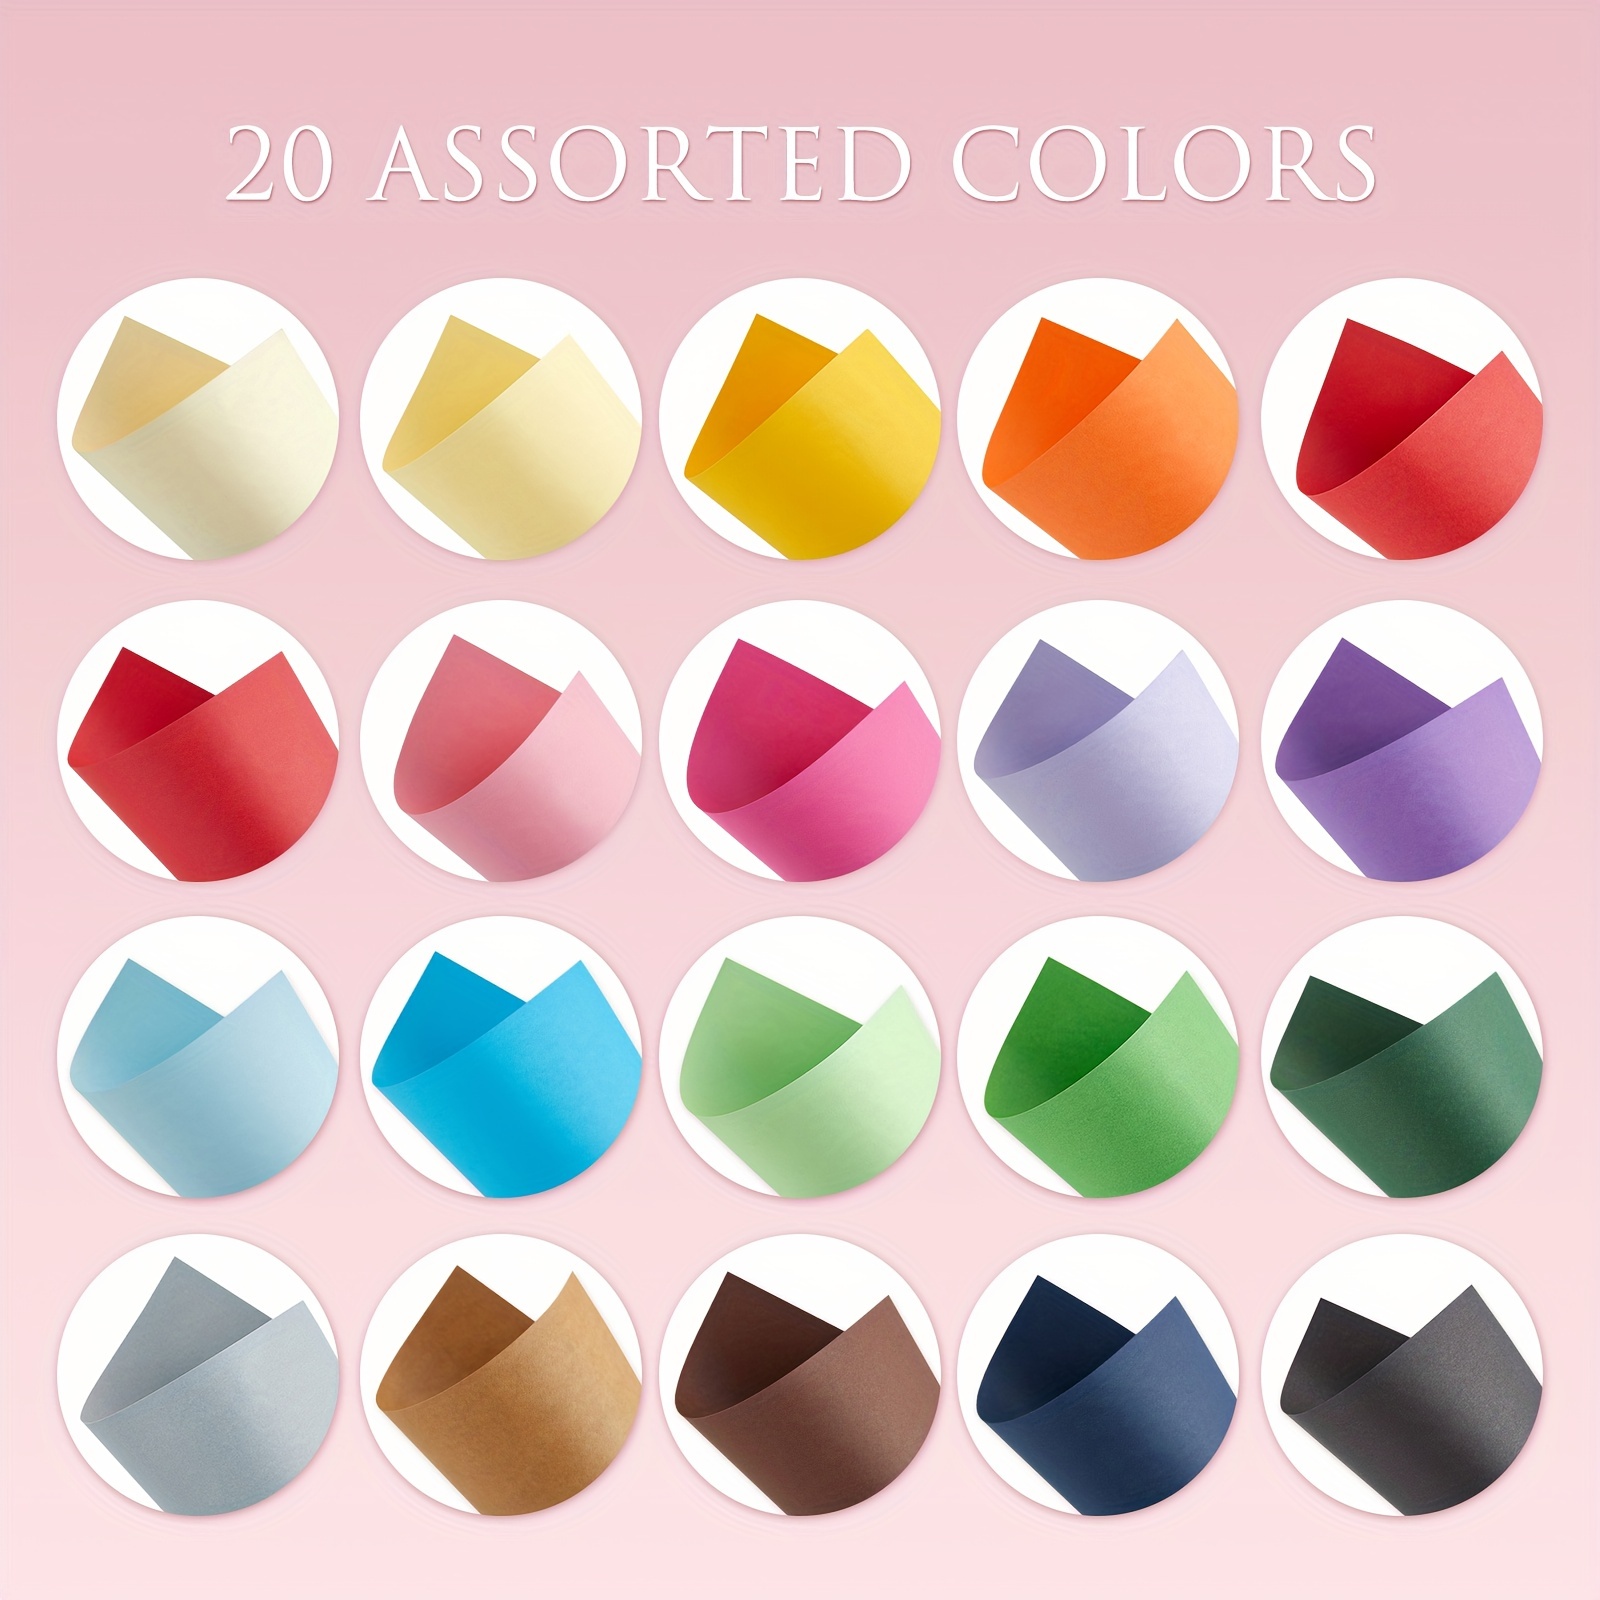 100 Sheets Metallic Colored Cardstock Paper, Assorted Colors for